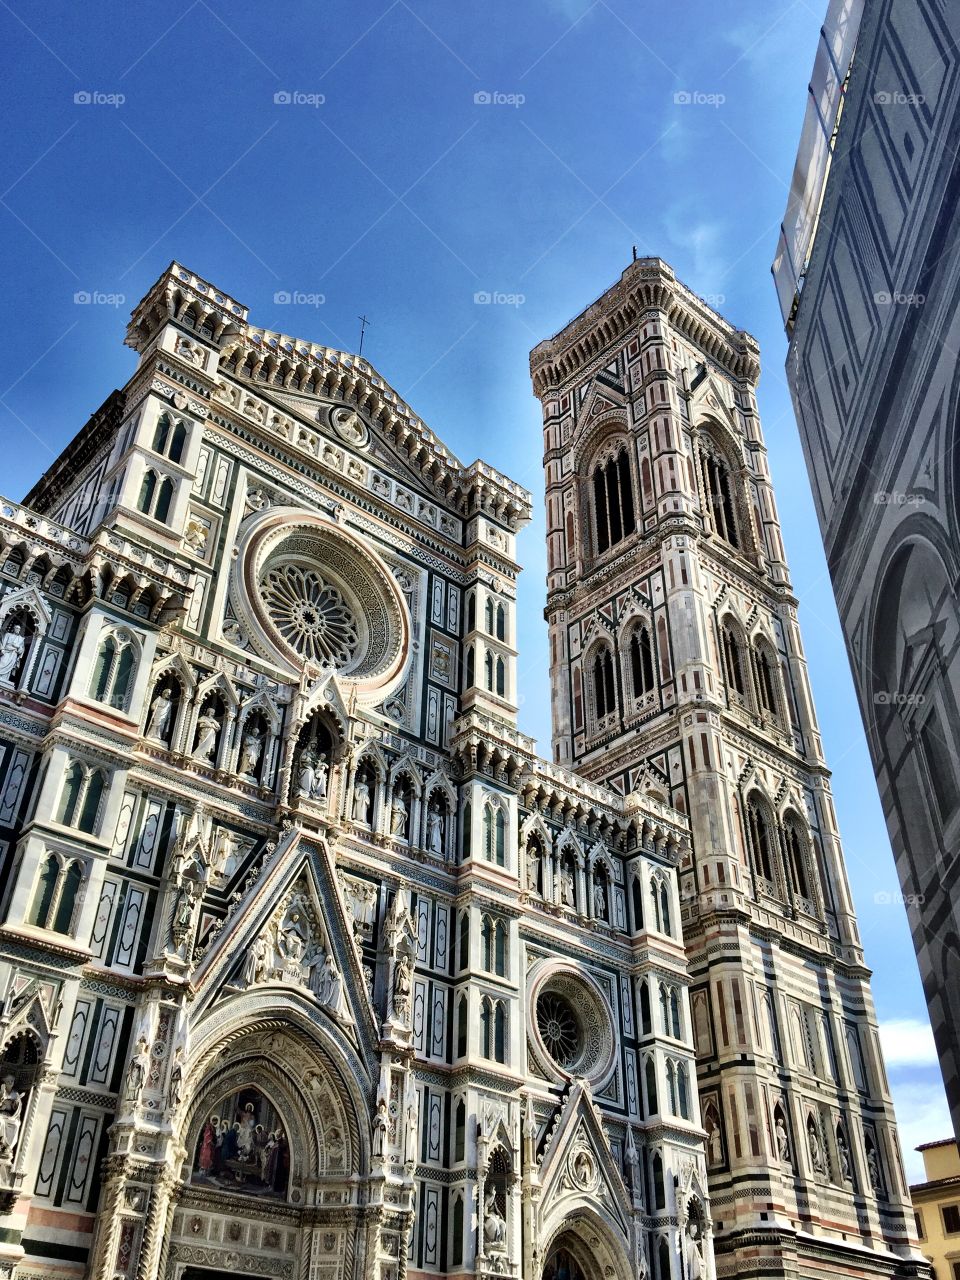 Santa Maria. On a clear day in Florence walking back from the train station I captured this view of the basilica. 